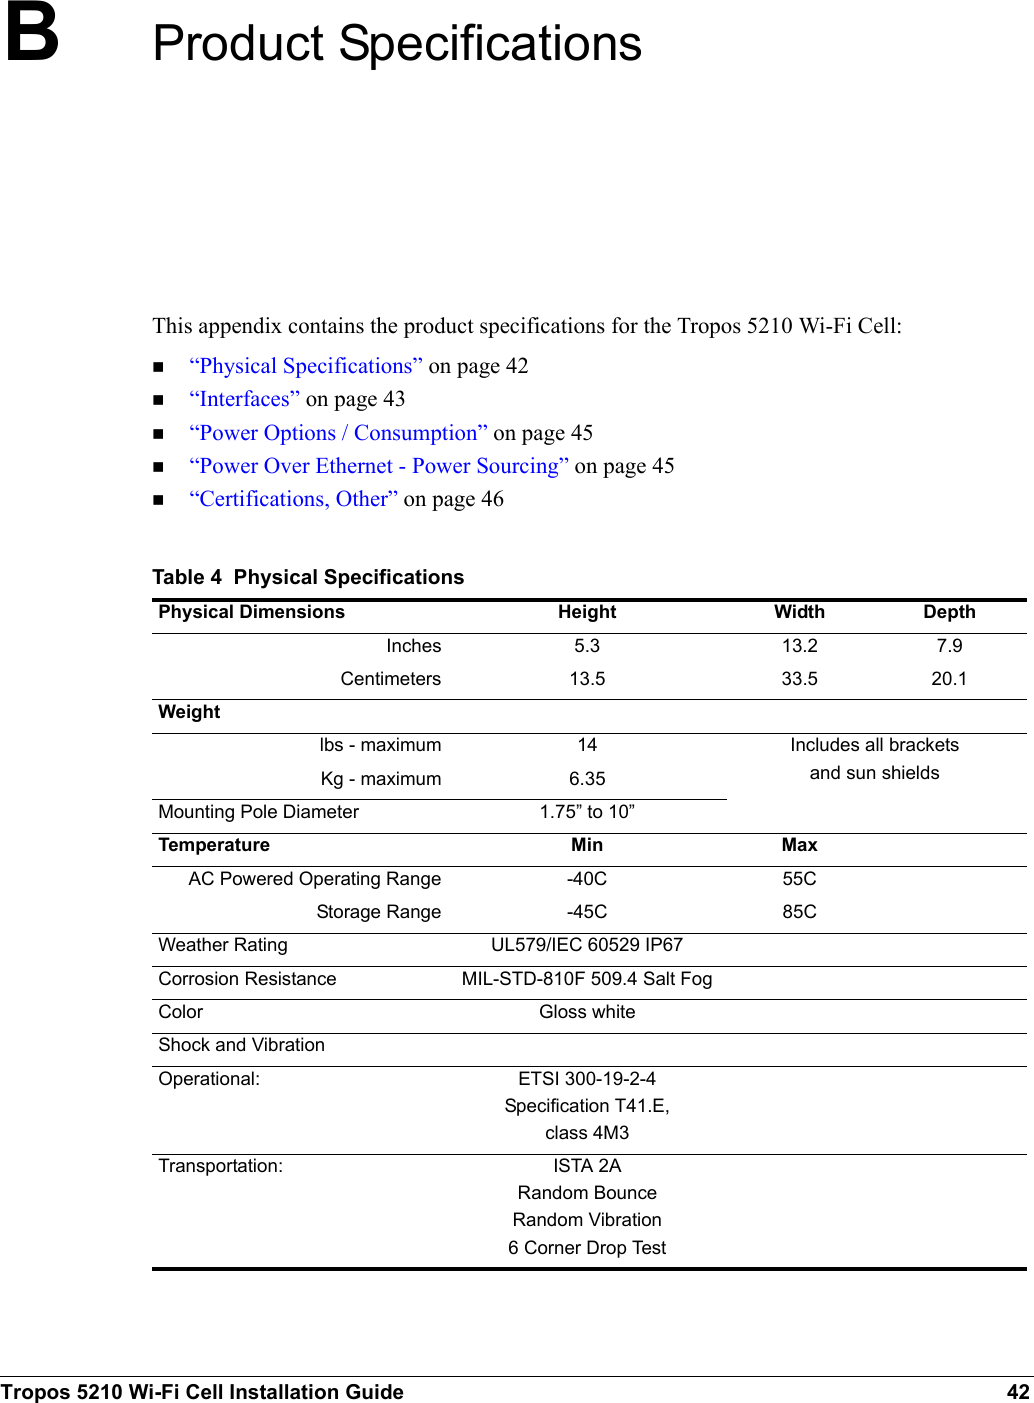 Tropos 5210 Wi-Fi Cell Installation Guide 42BProduct SpecificationsThis appendix contains the product specifications for the Tropos 5210 Wi-Fi Cell:“Physical Specifications” on page 42“Interfaces” on page 43“Power Options / Consumption” on page 45“Power Over Ethernet - Power Sourcing” on page 45“Certifications, Other” on page 46Table 4  Physical Specifications Physical Dimensions Height Width DepthInches 5.3 13.2 7.9Centimeters 13.5 33.5 20.1Weightlbs - maximum 14 Includes all brackets and sun shieldsKg - maximum 6.35Mounting Pole Diameter 1.75” to 10”Temperature Min MaxAC Powered Operating Range -40C 55CStorage Range -45C 85CWeather Rating UL579/IEC 60529 IP67Corrosion Resistance MIL-STD-810F 509.4 Salt FogColor Gloss whiteShock and VibrationOperational: ETSI 300-19-2-4Specification T41.E,class 4M3Transportation: ISTA 2ARandom BounceRandom Vibration6 Corner Drop Test